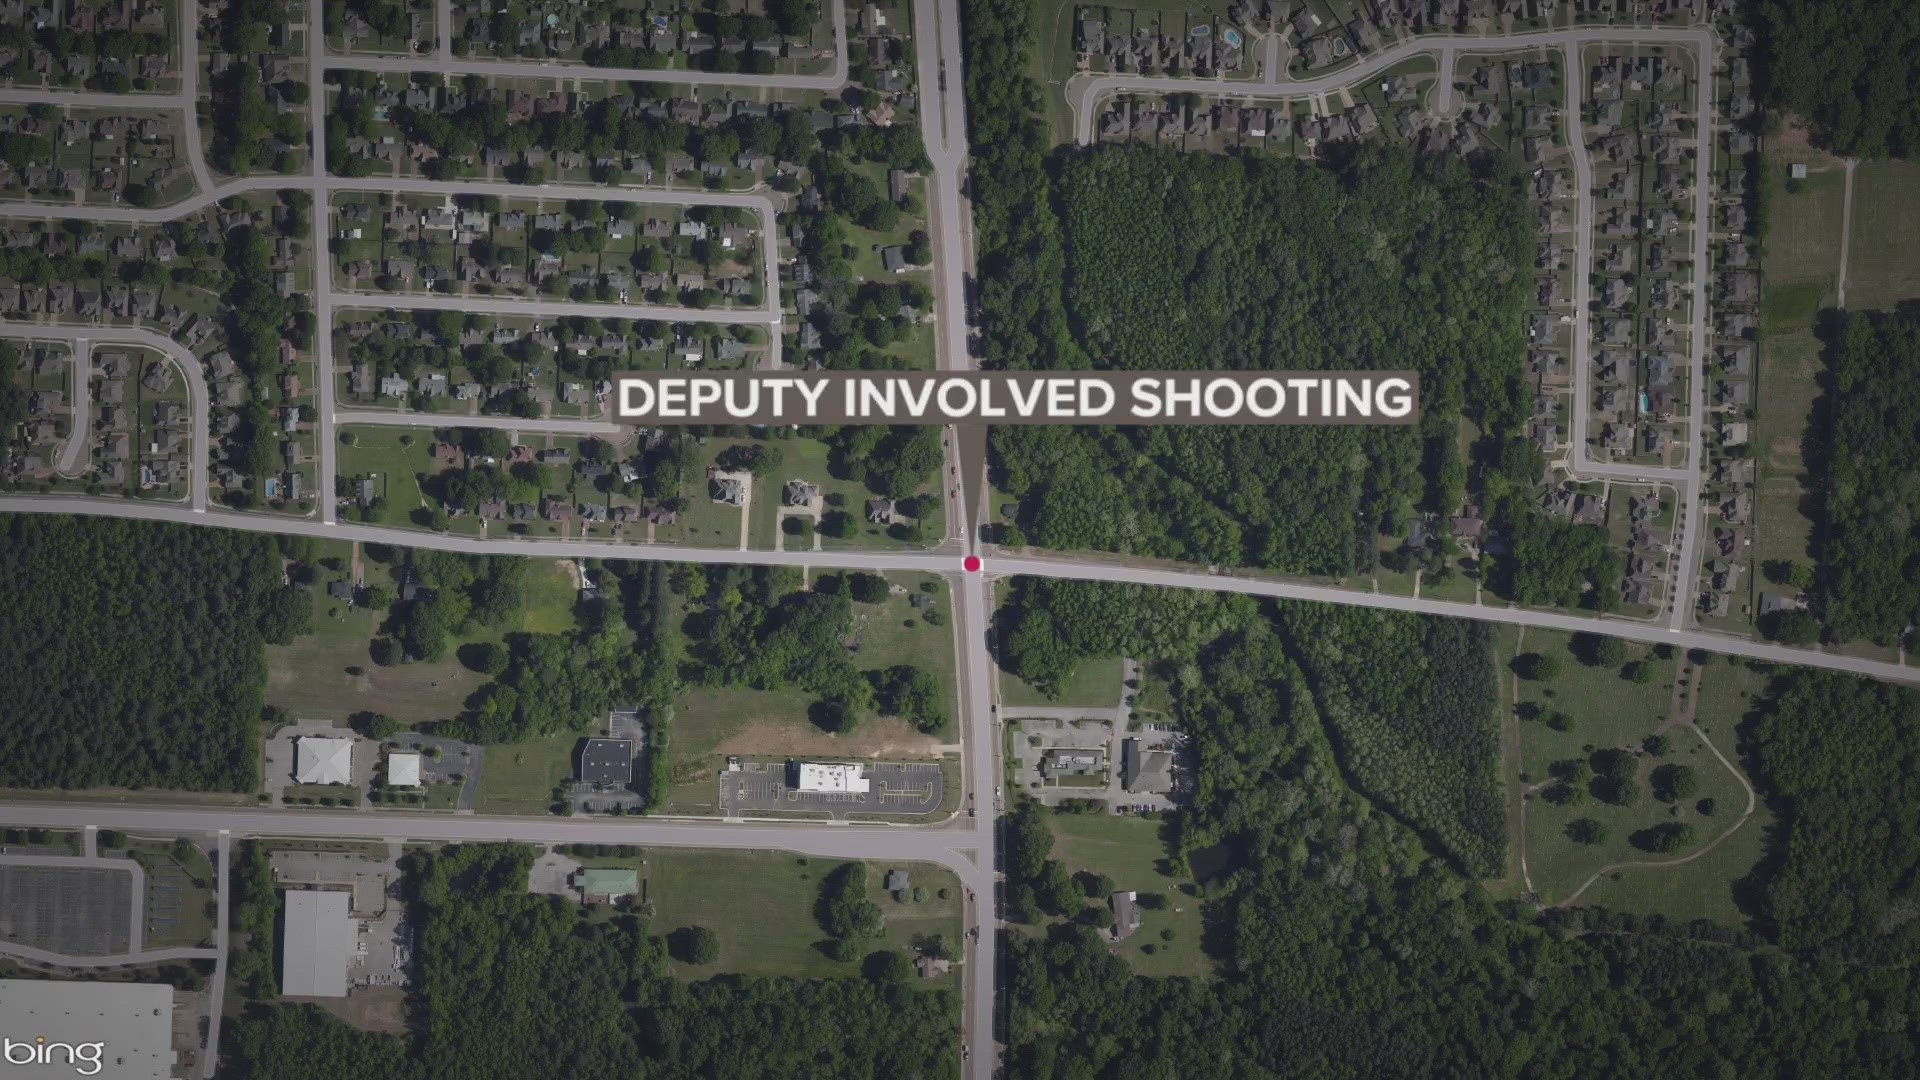 A deadly shooting where an officer was somehow involved took place at Ellis Road and Golden Velley Lane, according to the Shelby County Sheriff's Office.